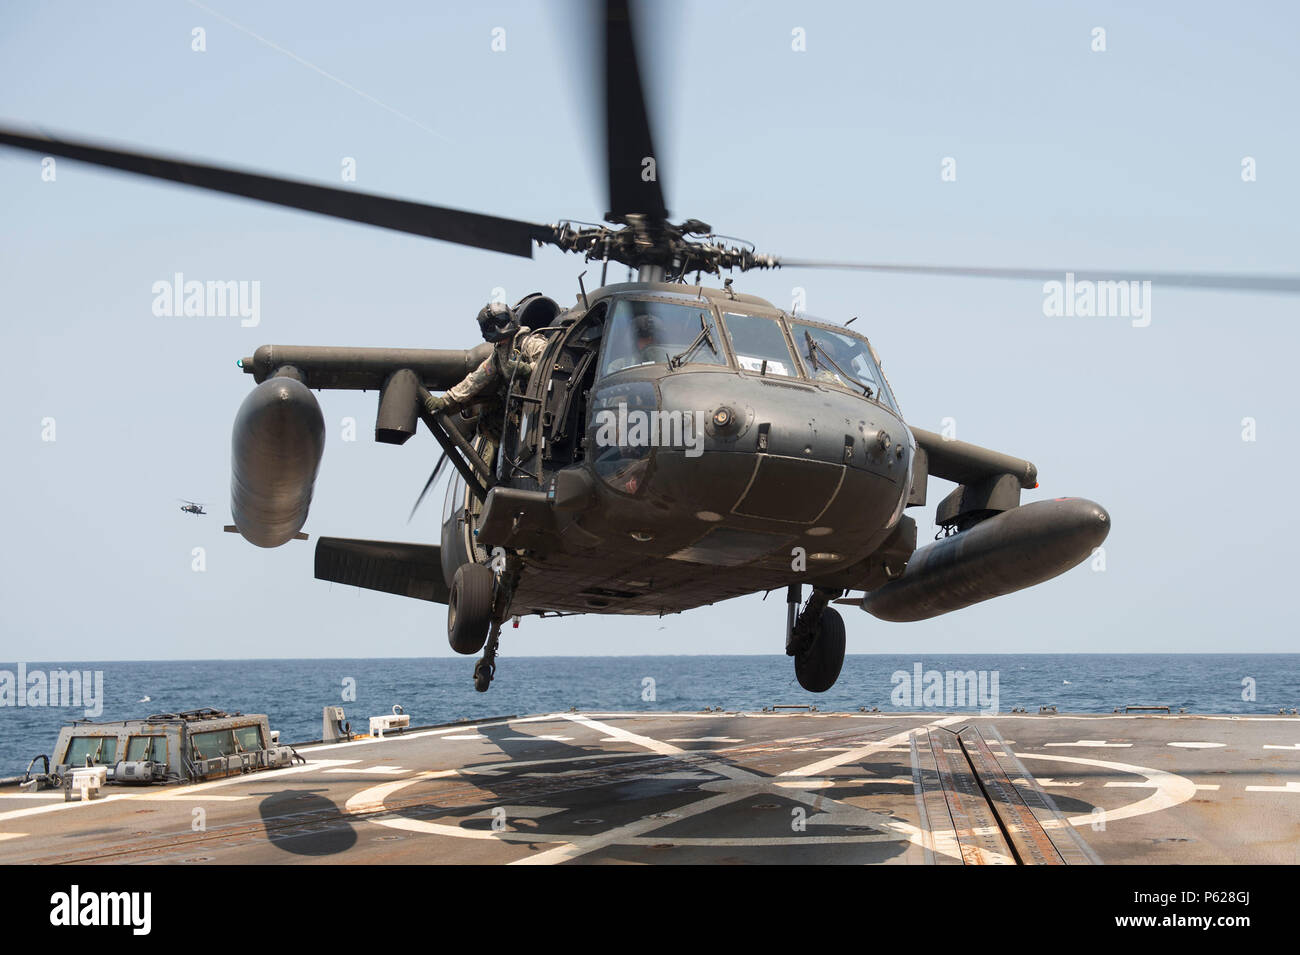 160414-N-MD297-072 PACIFIC OCEAN (April 14, 2016) An Army UH-60 Blackhawk helicopter from the 1st Battalion, 228th Aviation Regiment lands on the flight deck aboard the Arleigh Burke-class guided-missile destroyer USS Lassen (DDG 82) while conducting deck landing qualifications (DLQs). Lassen is currently underway in support of Operation Martillo, a joint operation with the U.S. Coast Guard and partner nations within the 4th Fleet area of responsibility. Operation Martillo is being led by Joint Interagency Task Force South, in support of U.S. Southern Command. (U.S. Navy photo by Mass Communic Stock Photo